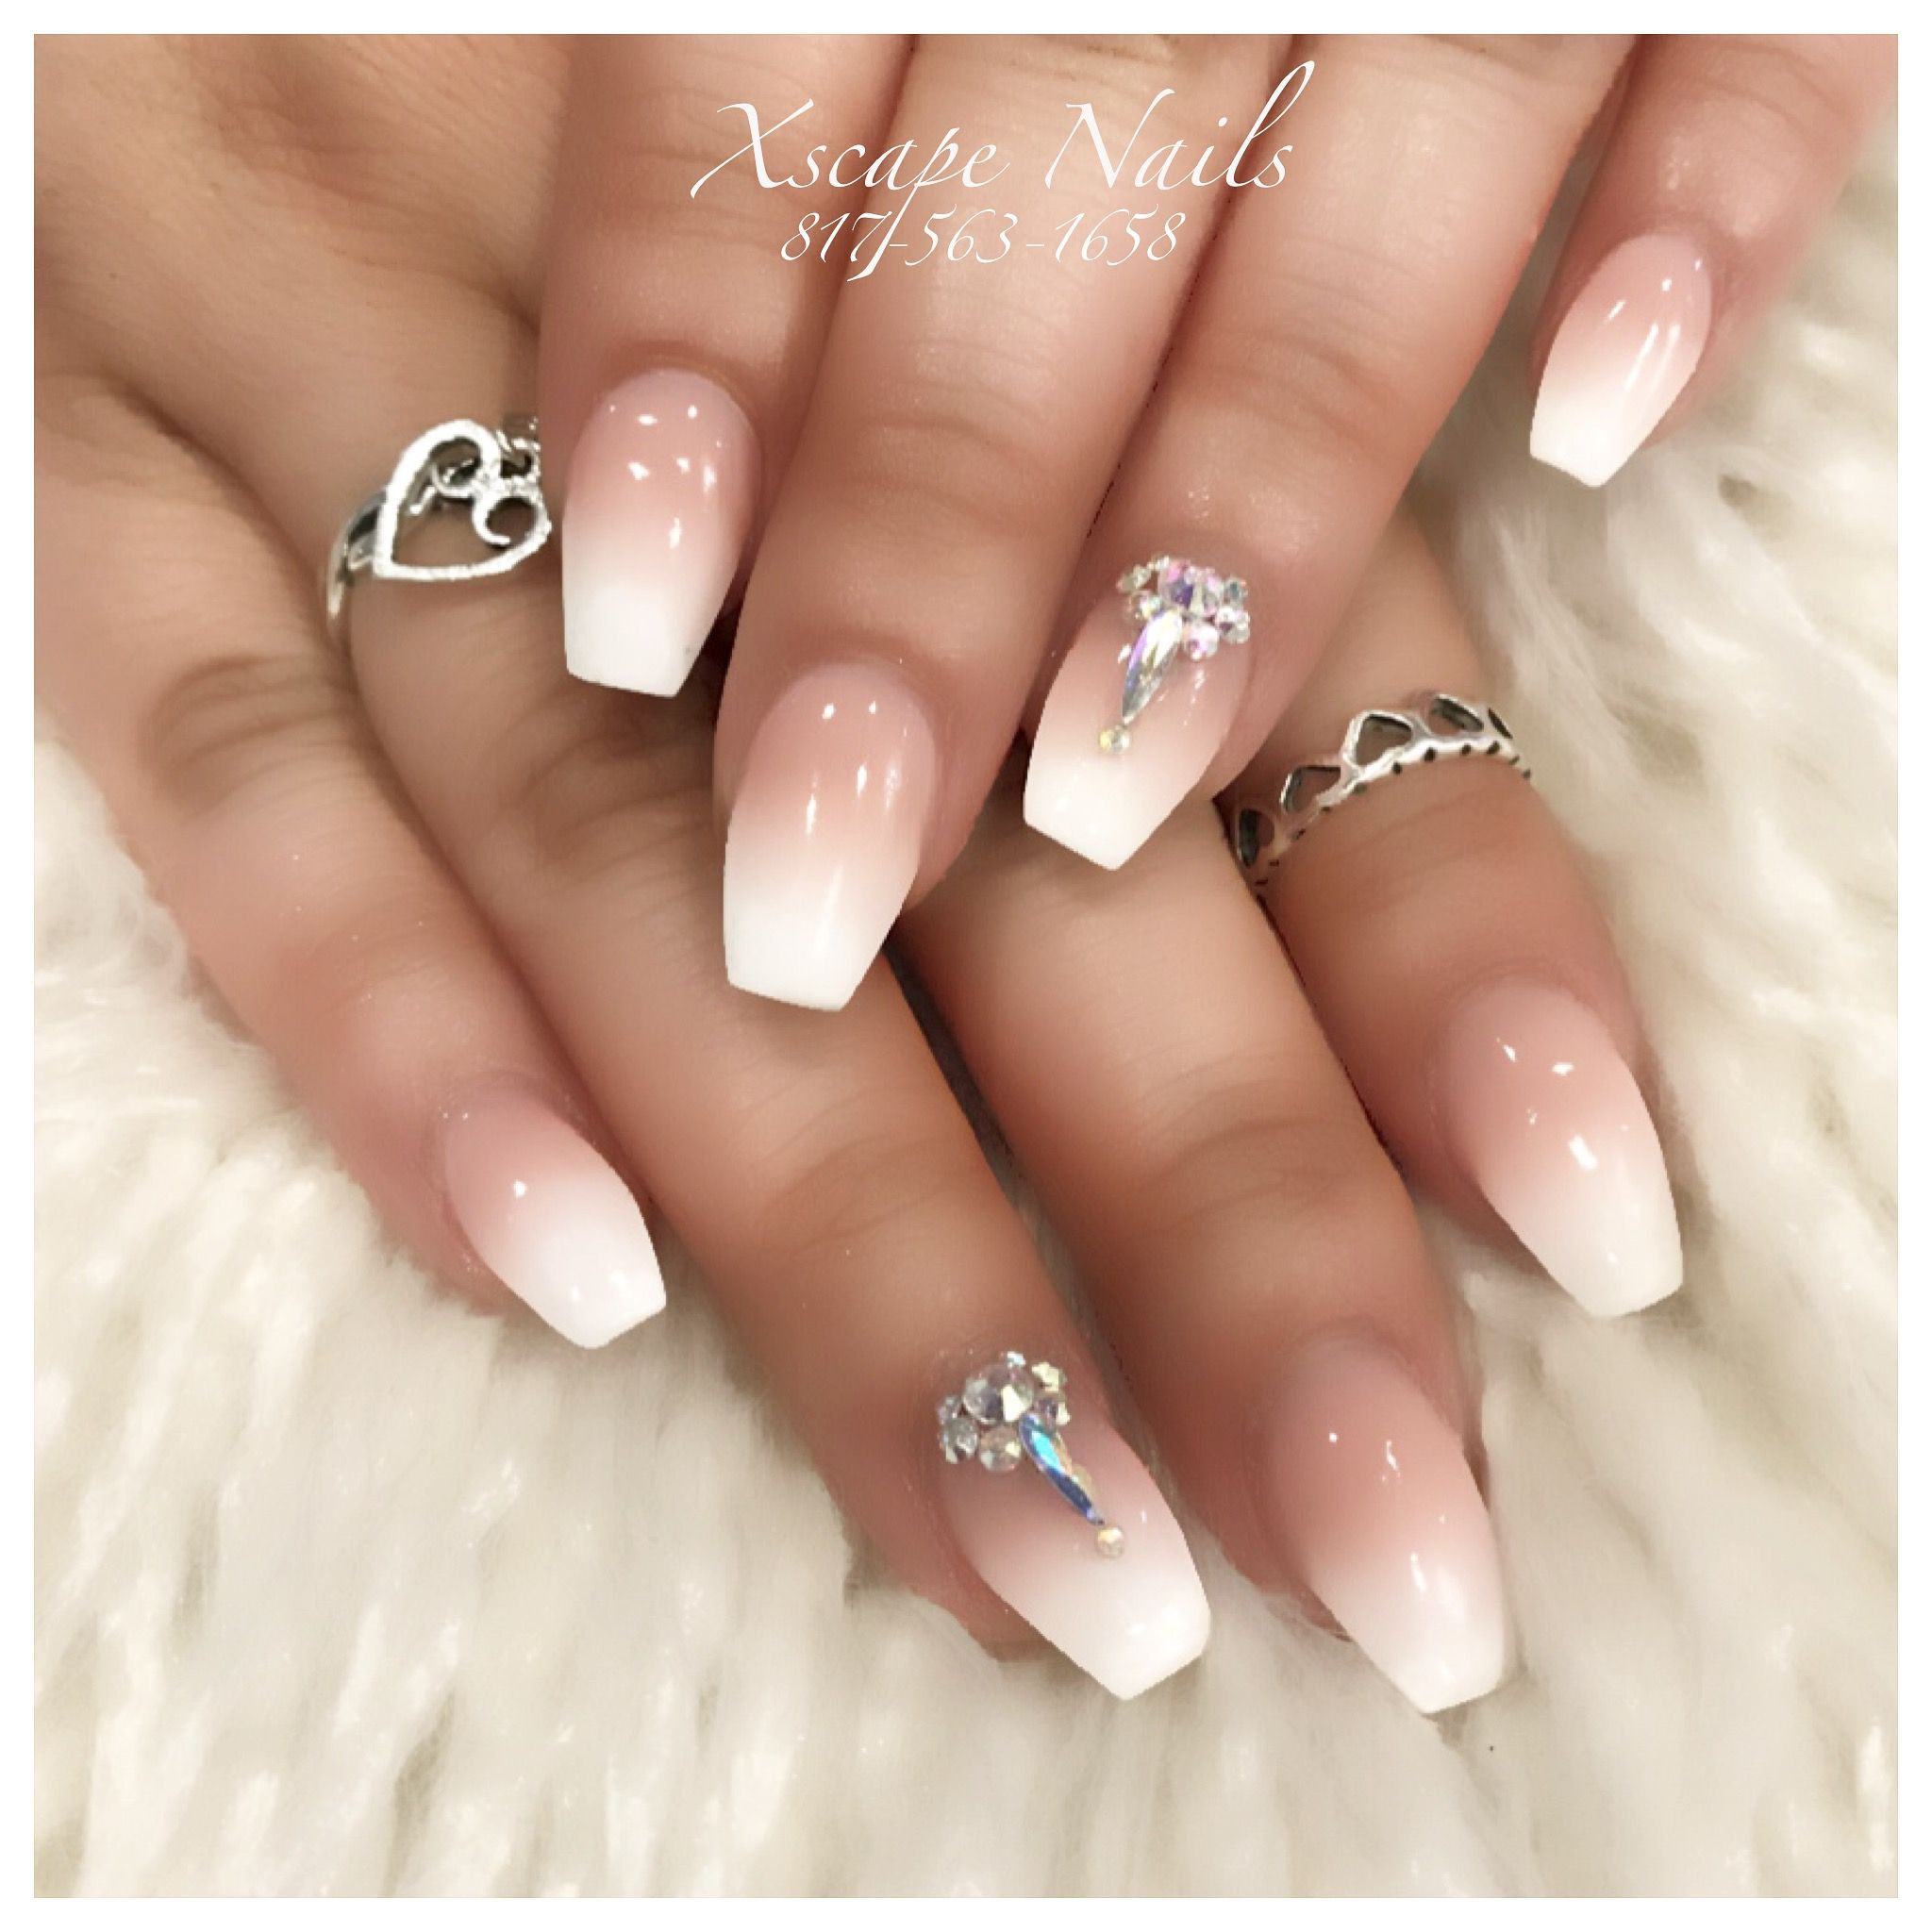 Pictures Of Solar Nail Designs
 Ombré solar nails Cute Nails Designs in 2019